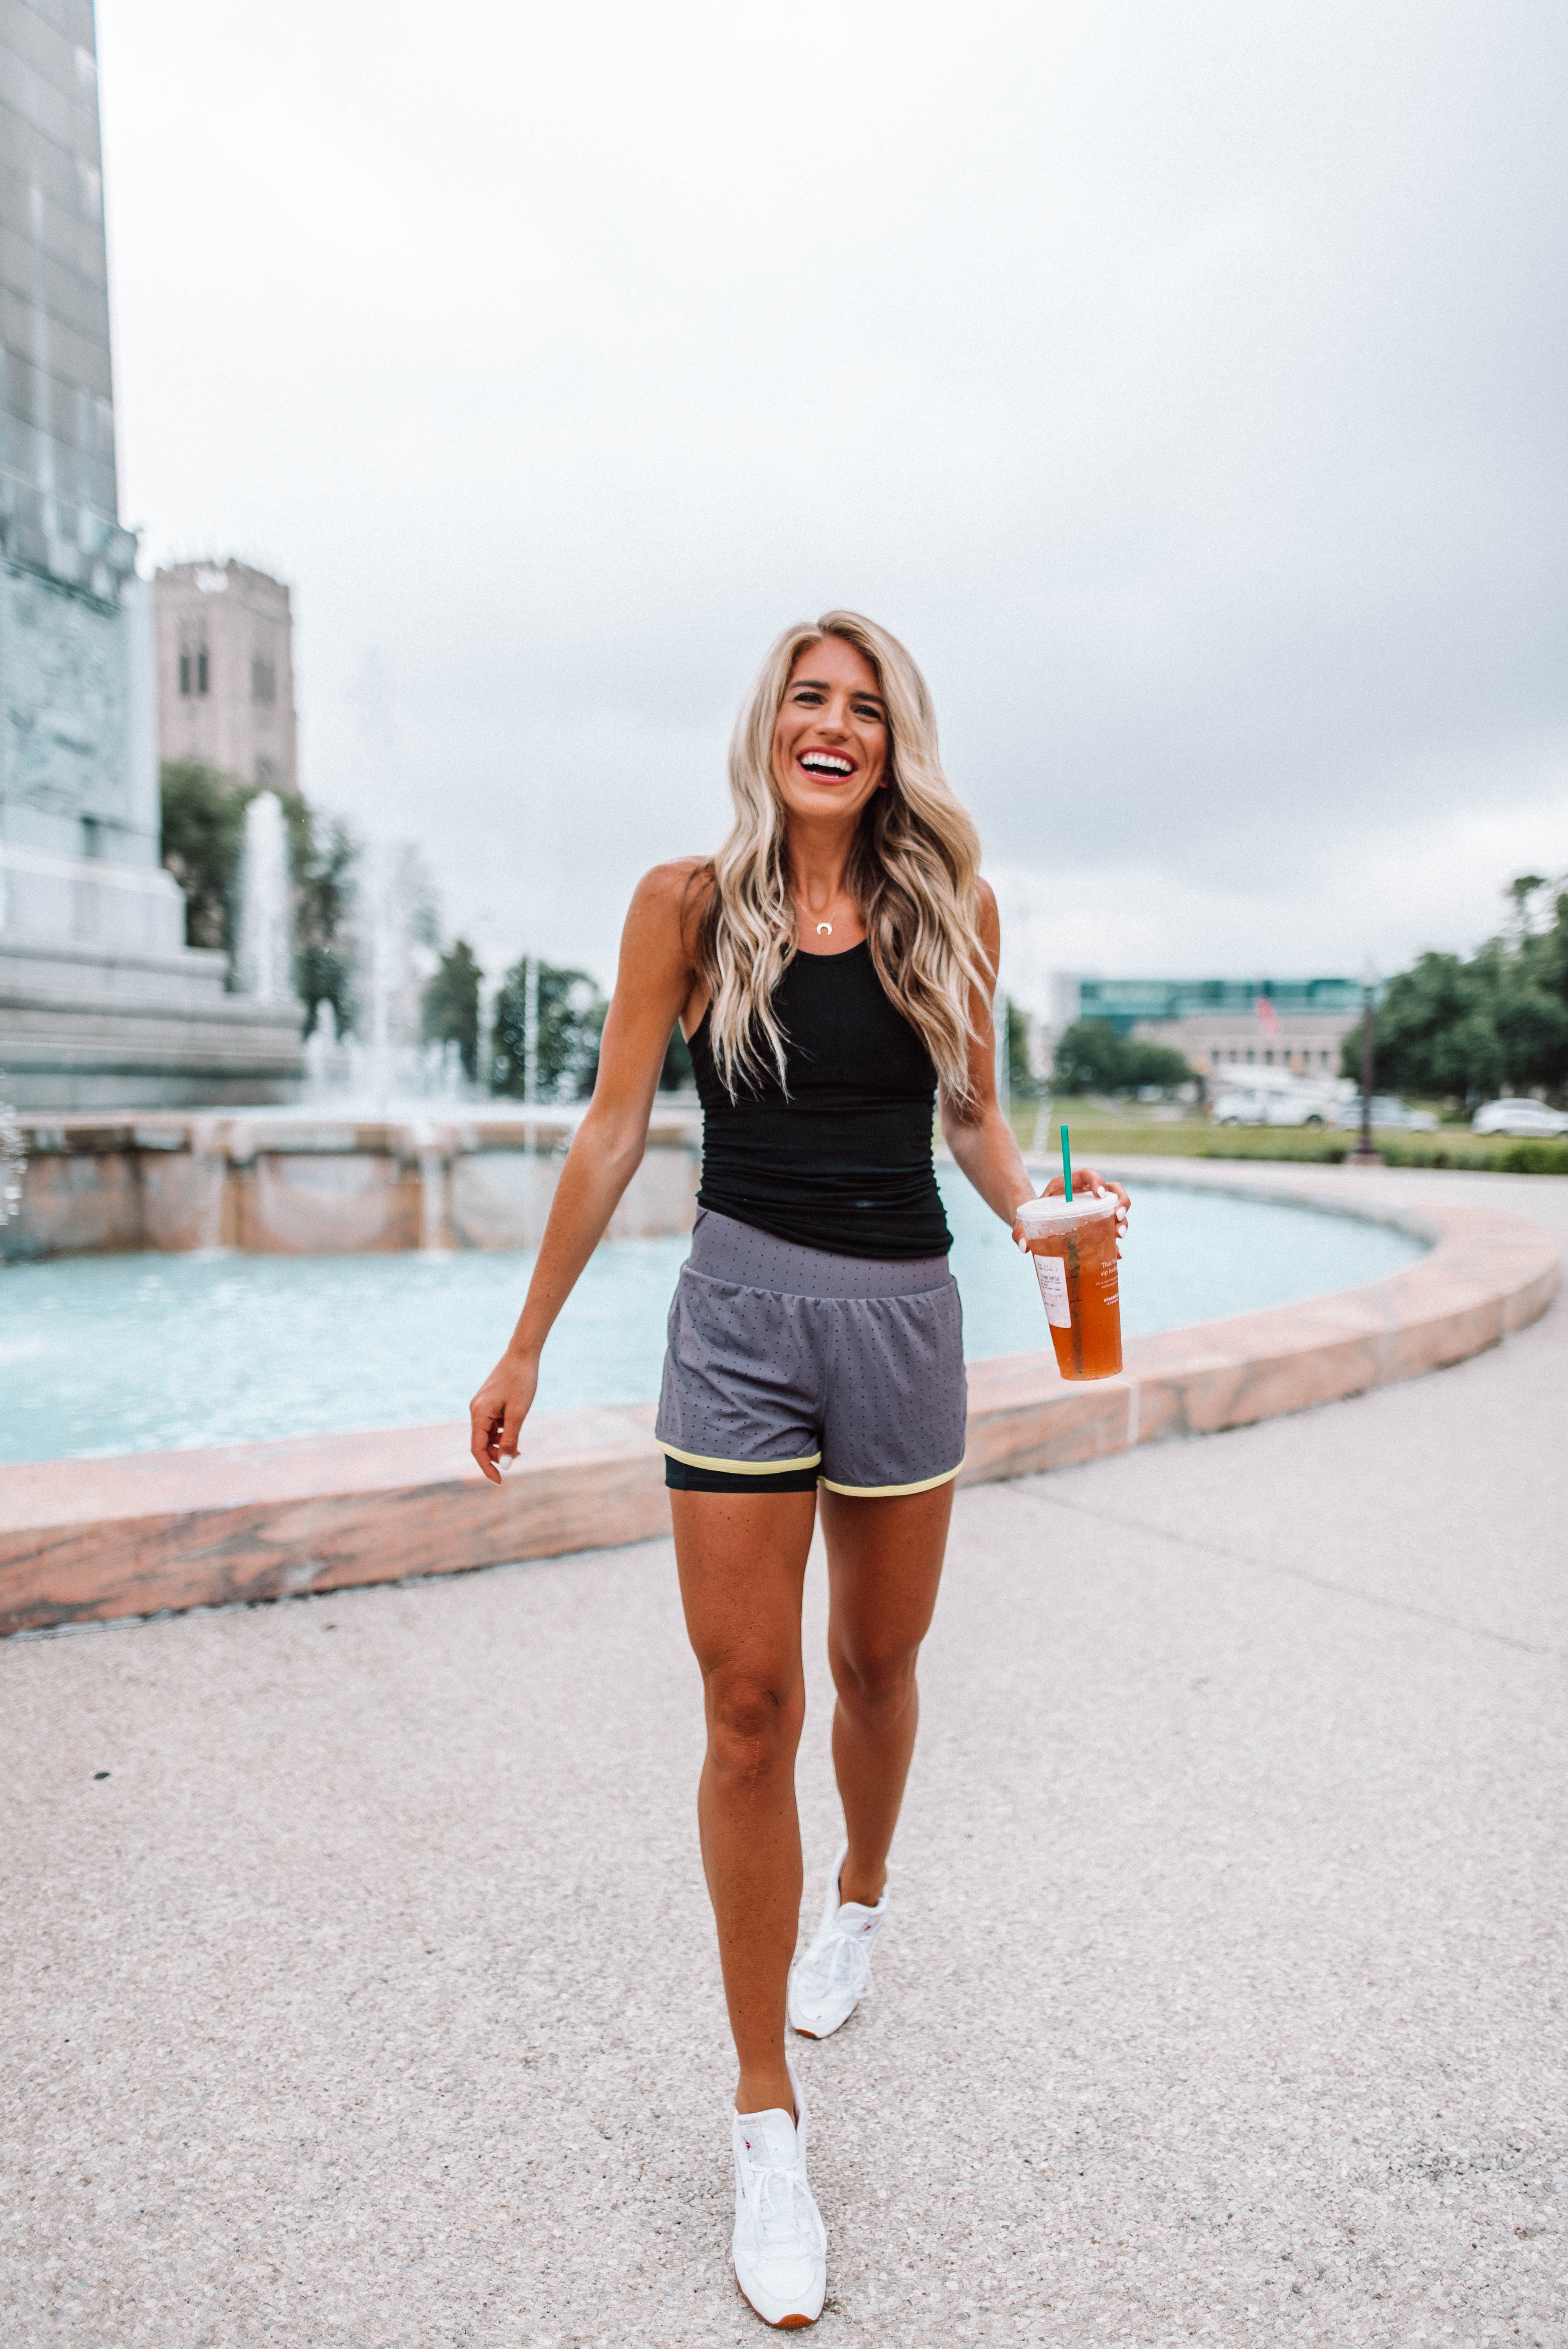 Tall Blonde Bell - Fashion + Lifestyle by My Health Tips - Ashley Bell @tallblondebell.com